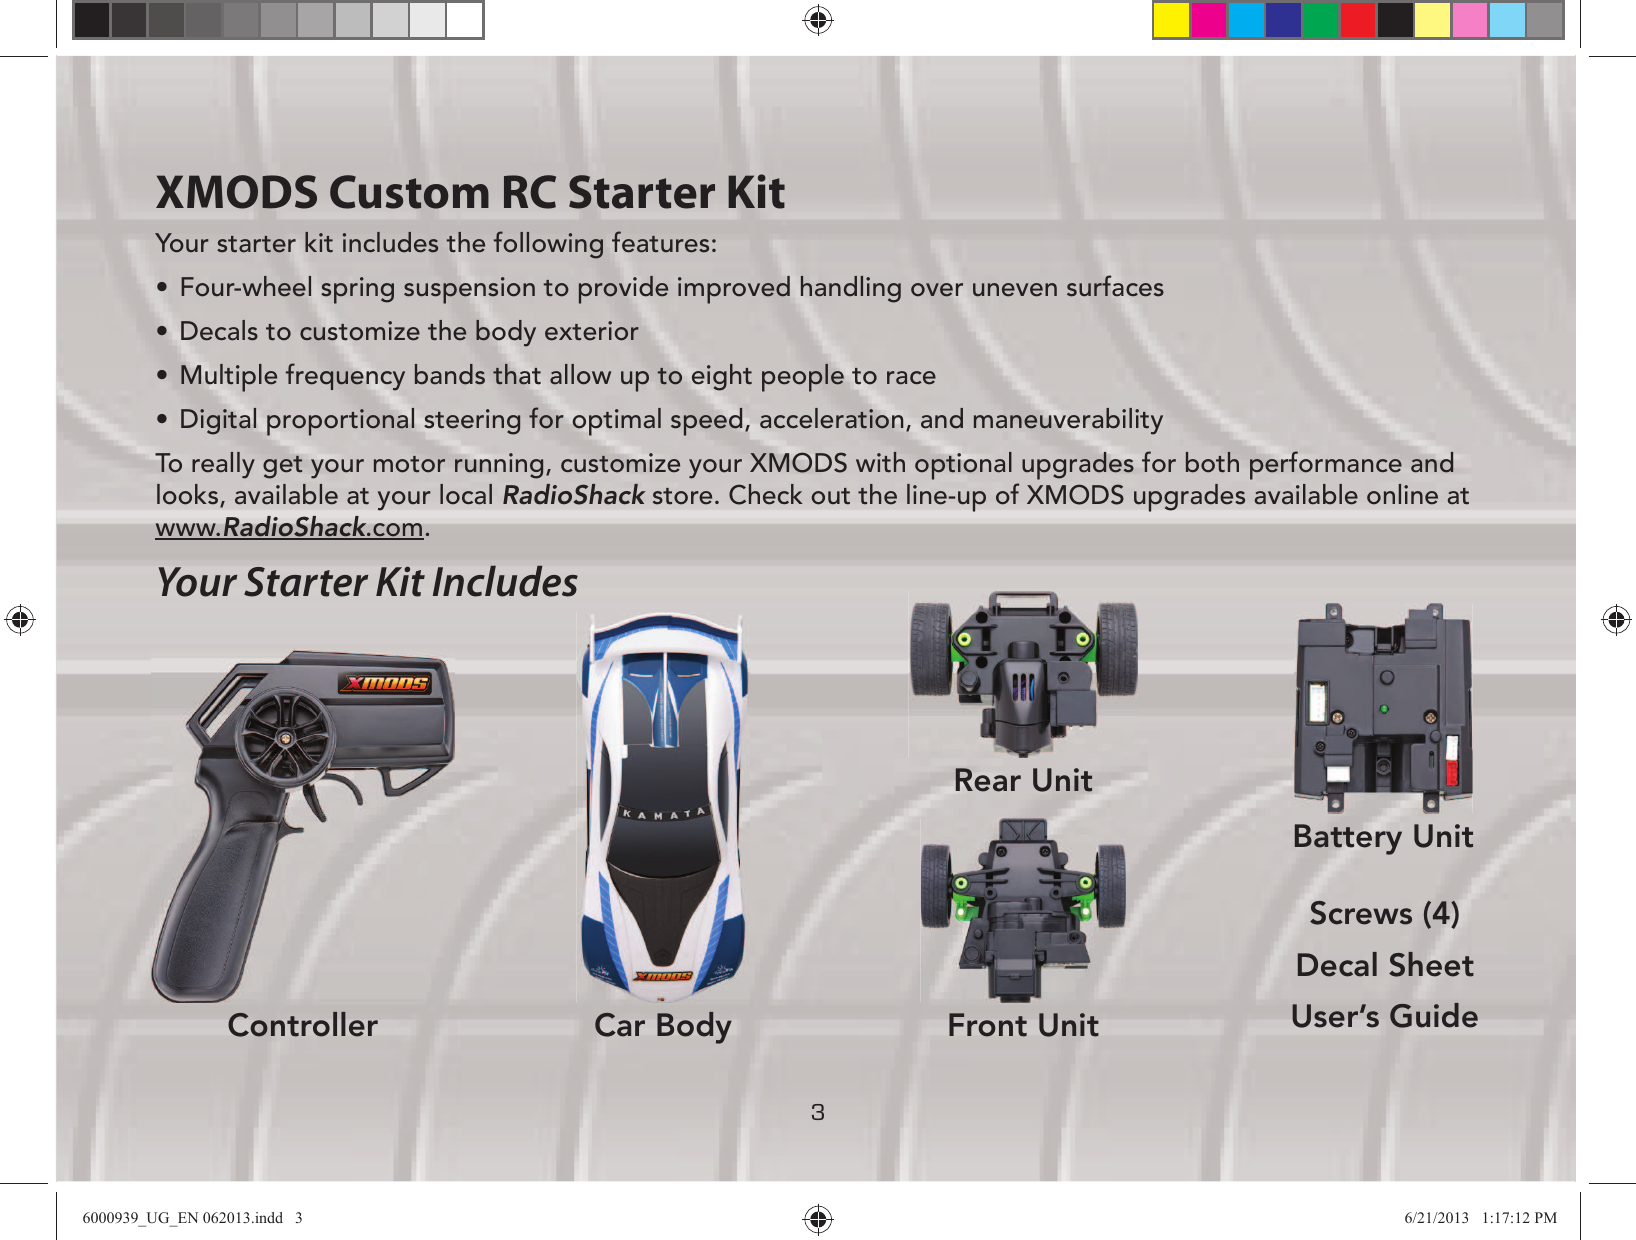 3XMODS Custom RC Starter KitYour starter kit includes the following features:UÊ Four-wheel spring suspension to provide improved handling over uneven surfacesUÊ Decals to customize the body exteriorUÊ Multiple frequency bands that allow up to eight people to raceUÊ Digital proportional steering for optimal speed, acceleration, and maneuverabilityTo really get your motor running, customize your XMODS with optional upgrades for both performance and looks, available at your local RadioShack store. Check out the line-up of XMODS upgrades available online at www.RadioShack.com.Your Starter Kit IncludesScrews (4)Decal SheetUser’s GuideBattery UnitController Car BodyRear UnitFront Unit6000939_UG_EN 062013.indd   3 6/21/2013   1:17:12 PM